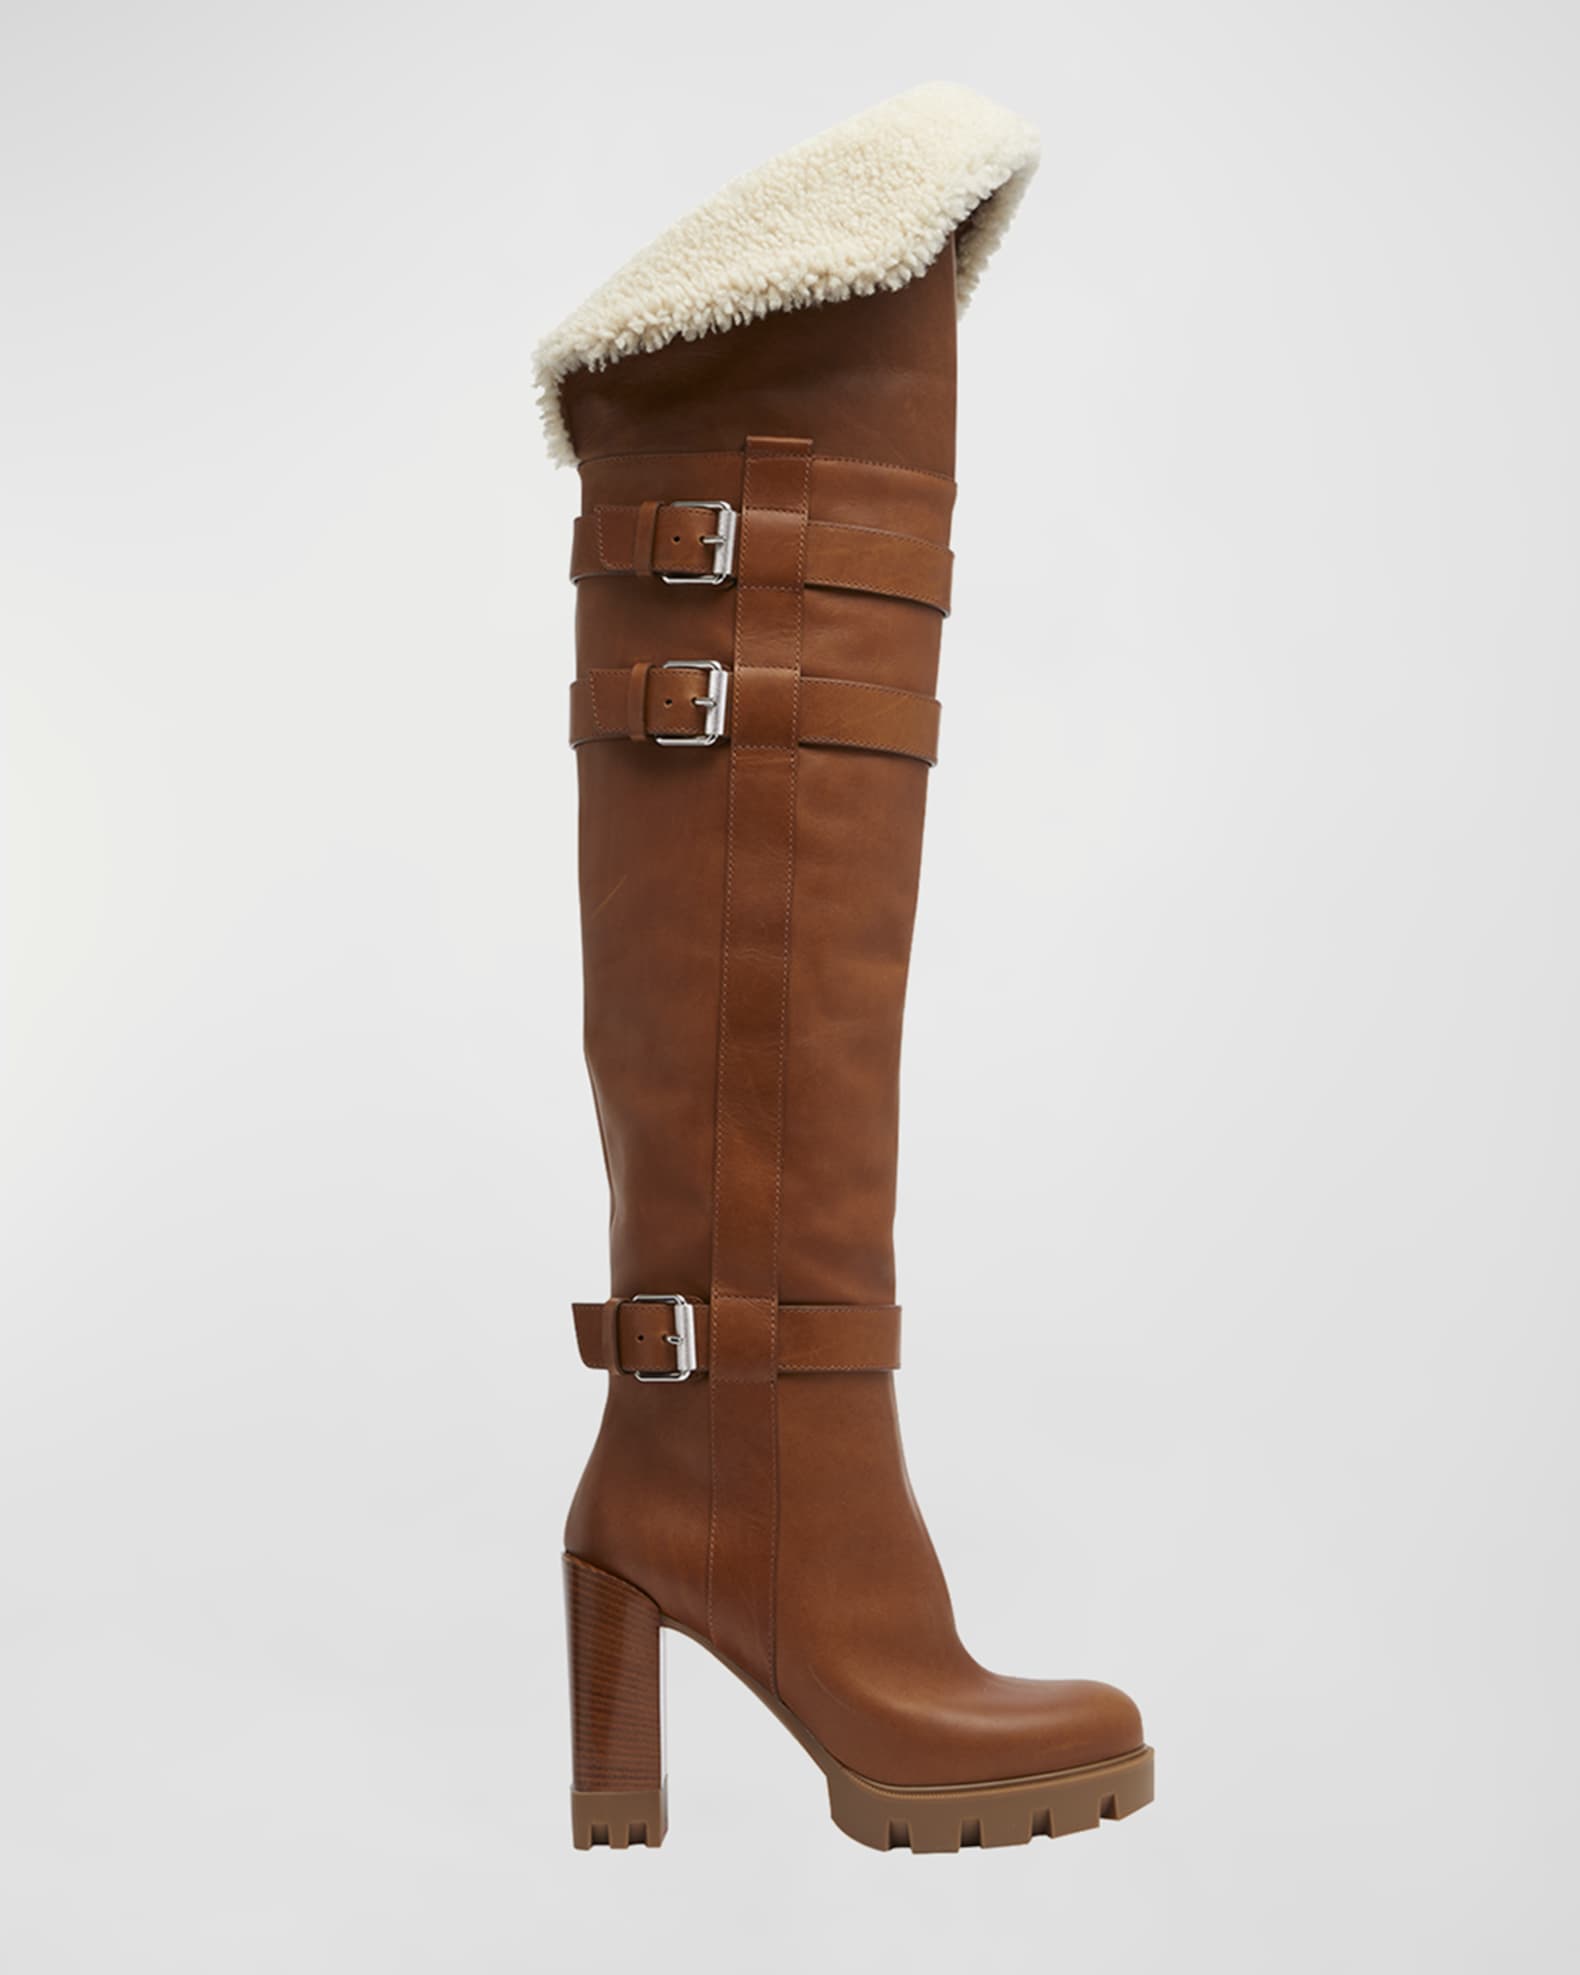 Christian Louboutin Brodeback Lug Botta Alta Shearling-Lined Red Sole Knee-High Boots